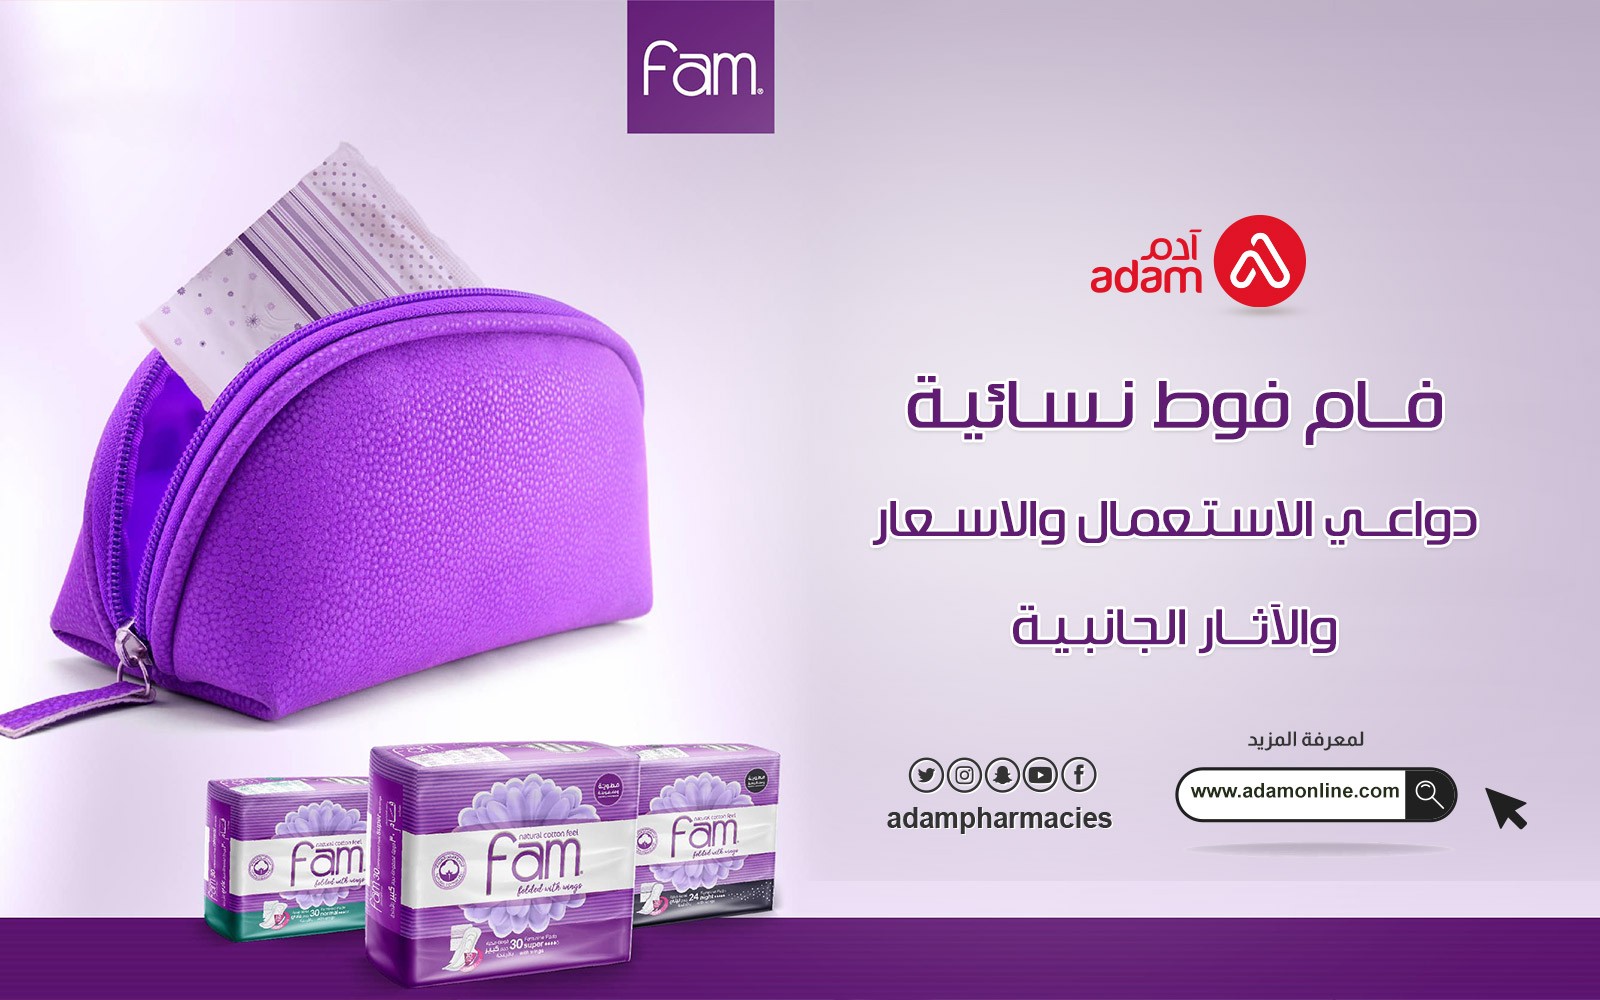 Fam feminine pads: indications for use, prices and side effects